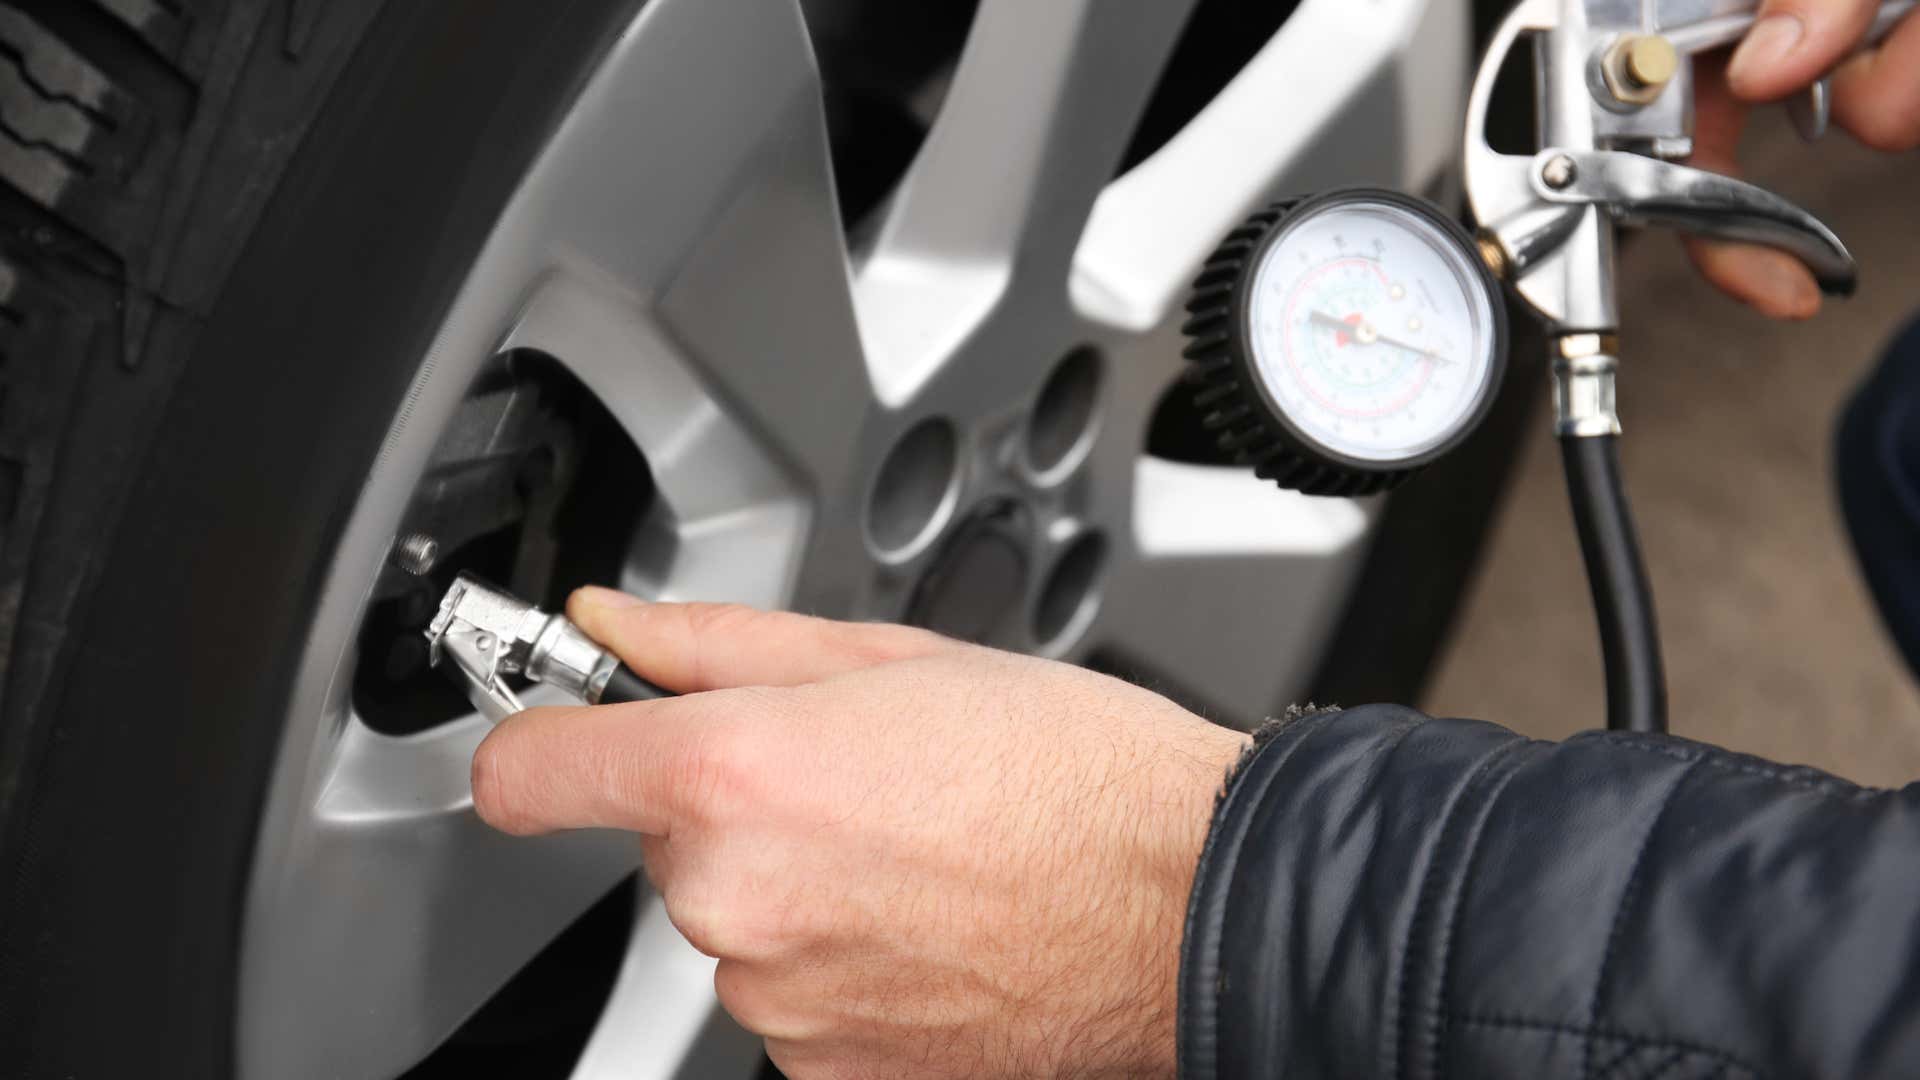 A TPMS light means it's time to check your tires.